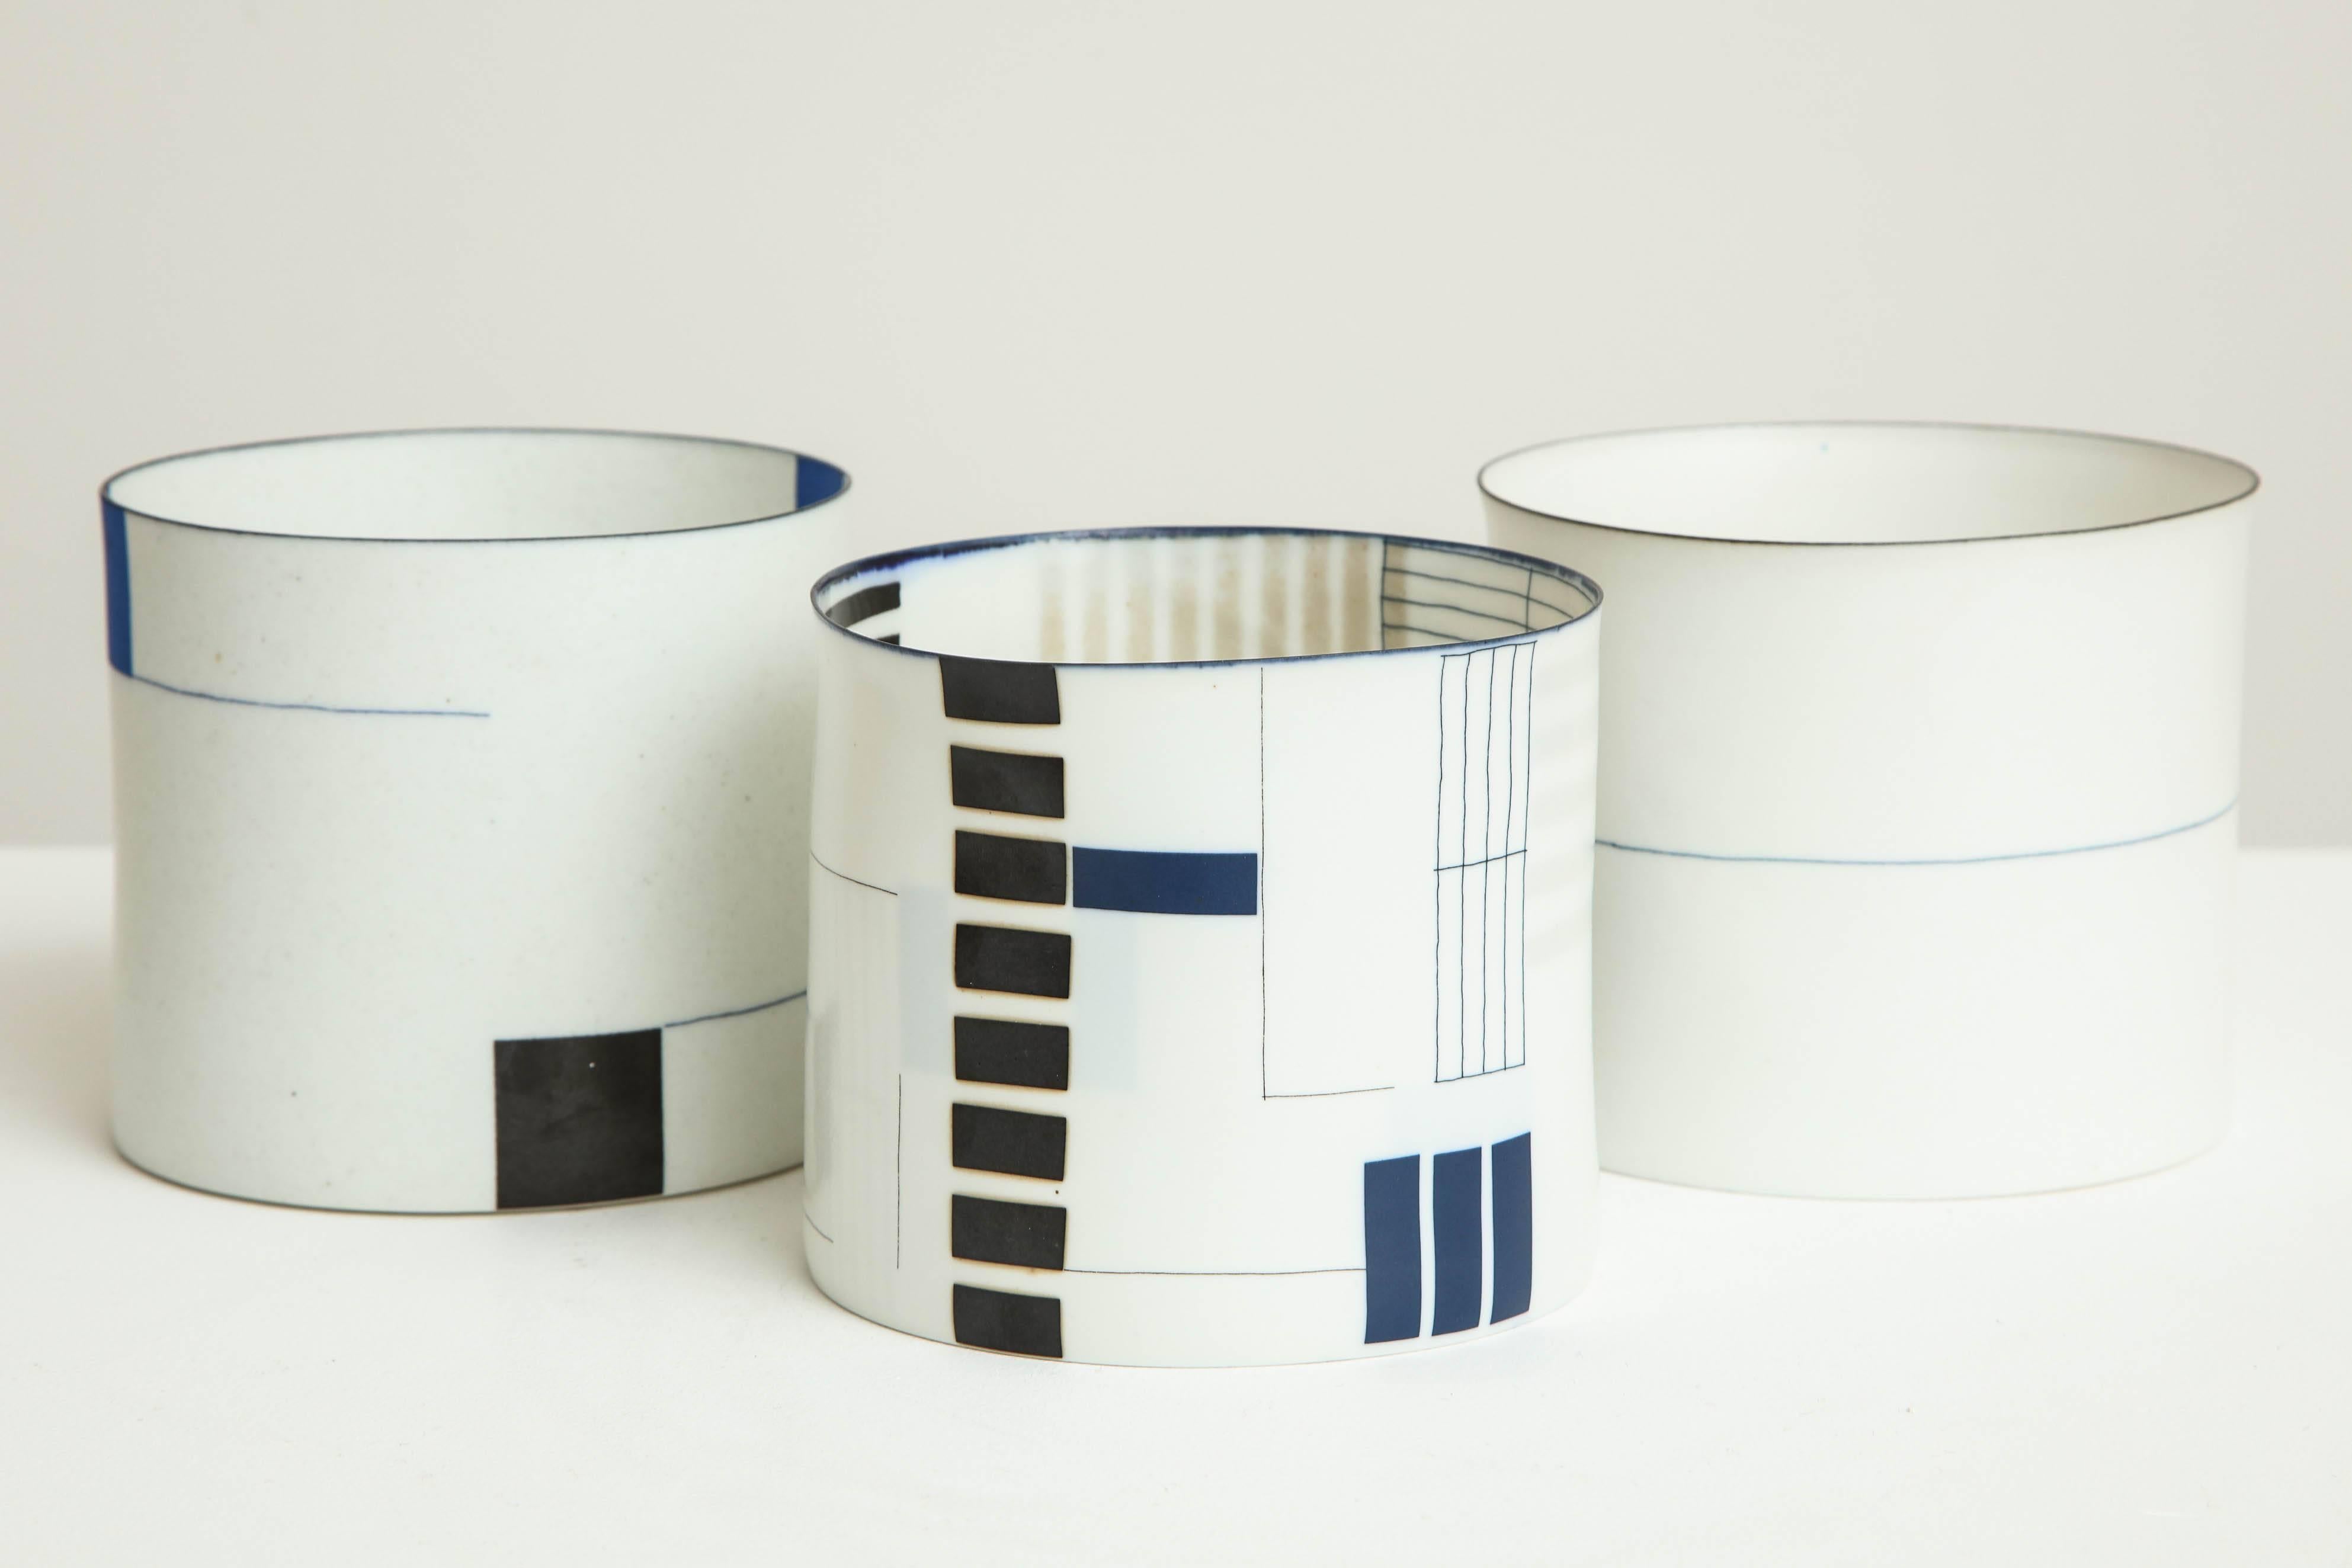 Born in Copenhagen in 1943, Bodil Manz is a ceramicist known for her predominant use of ultra-thin, translucent eggshell porcelain to create distinctive cylindrical forms, anchored by bold, geometric abstractions. 

Bodil Manz (Danish